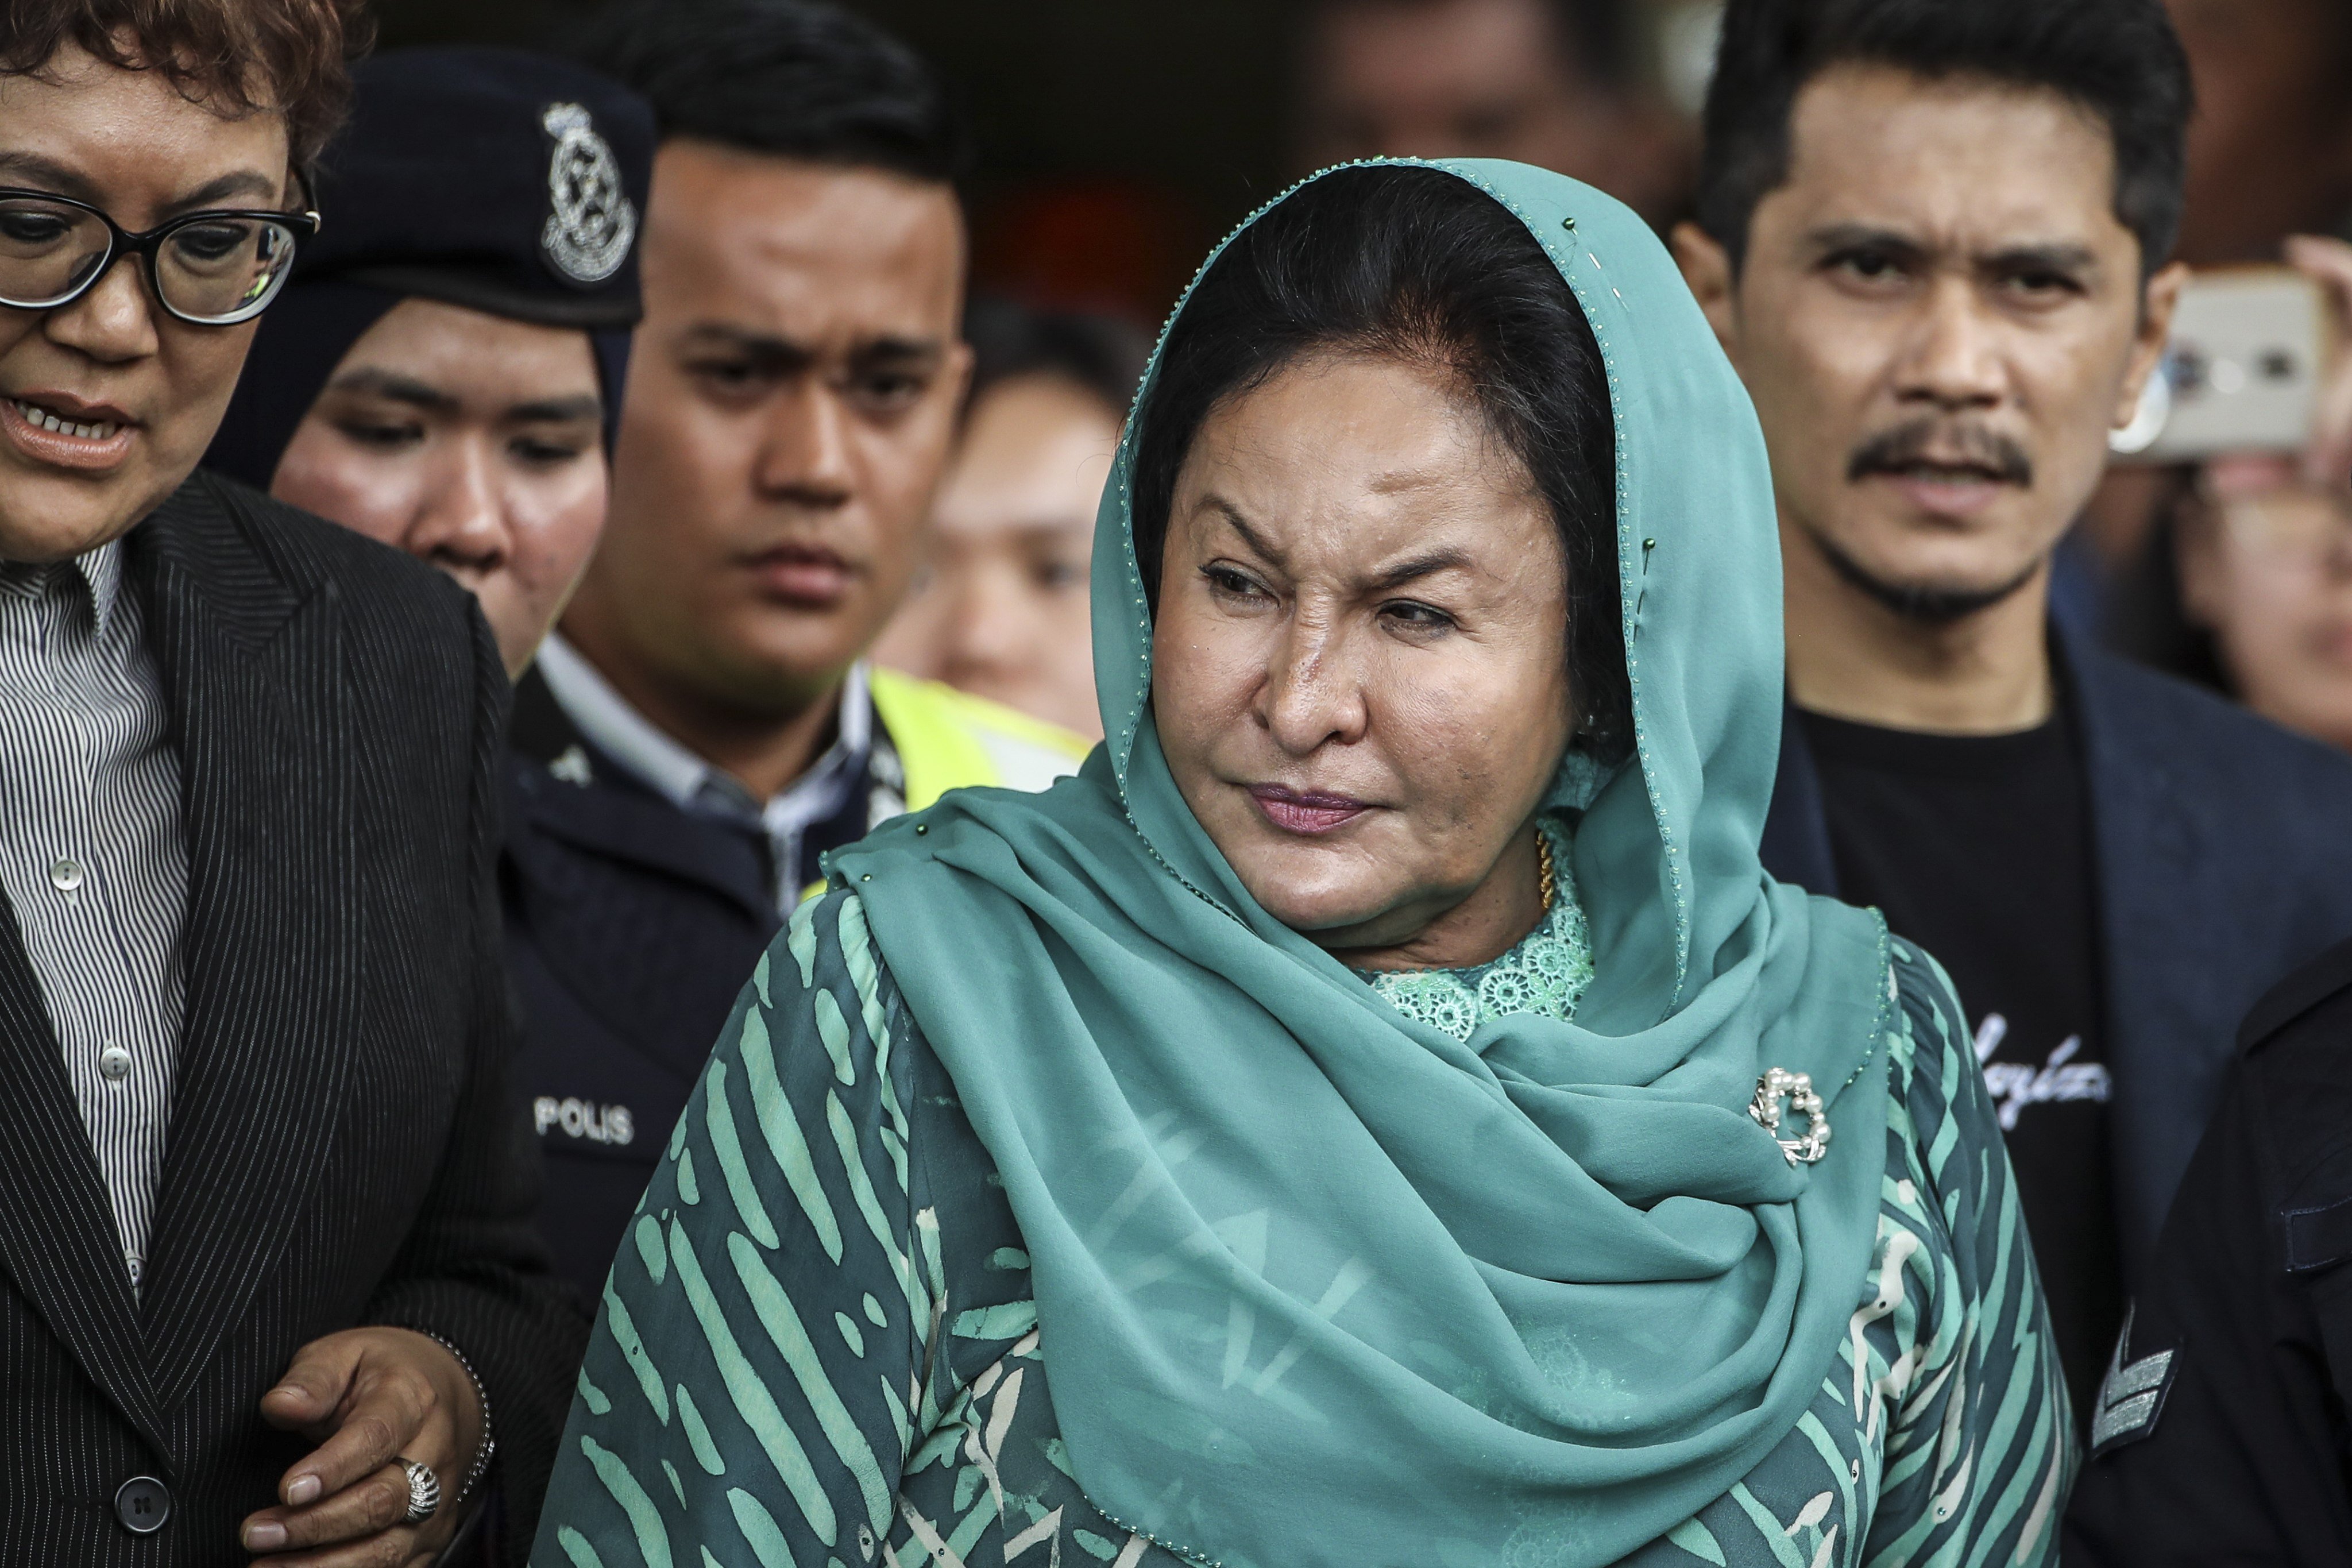 Rosmah Mansor (centre), wife of former Malaysian prime minister Najib Razak, leaves the Kuala Lumpur High Court on April 10, 2019 where she faced corruption charges in relation to misappropriation with regards to a solar panel project for rural schools in Sarawak. Photo: EPA-EFE